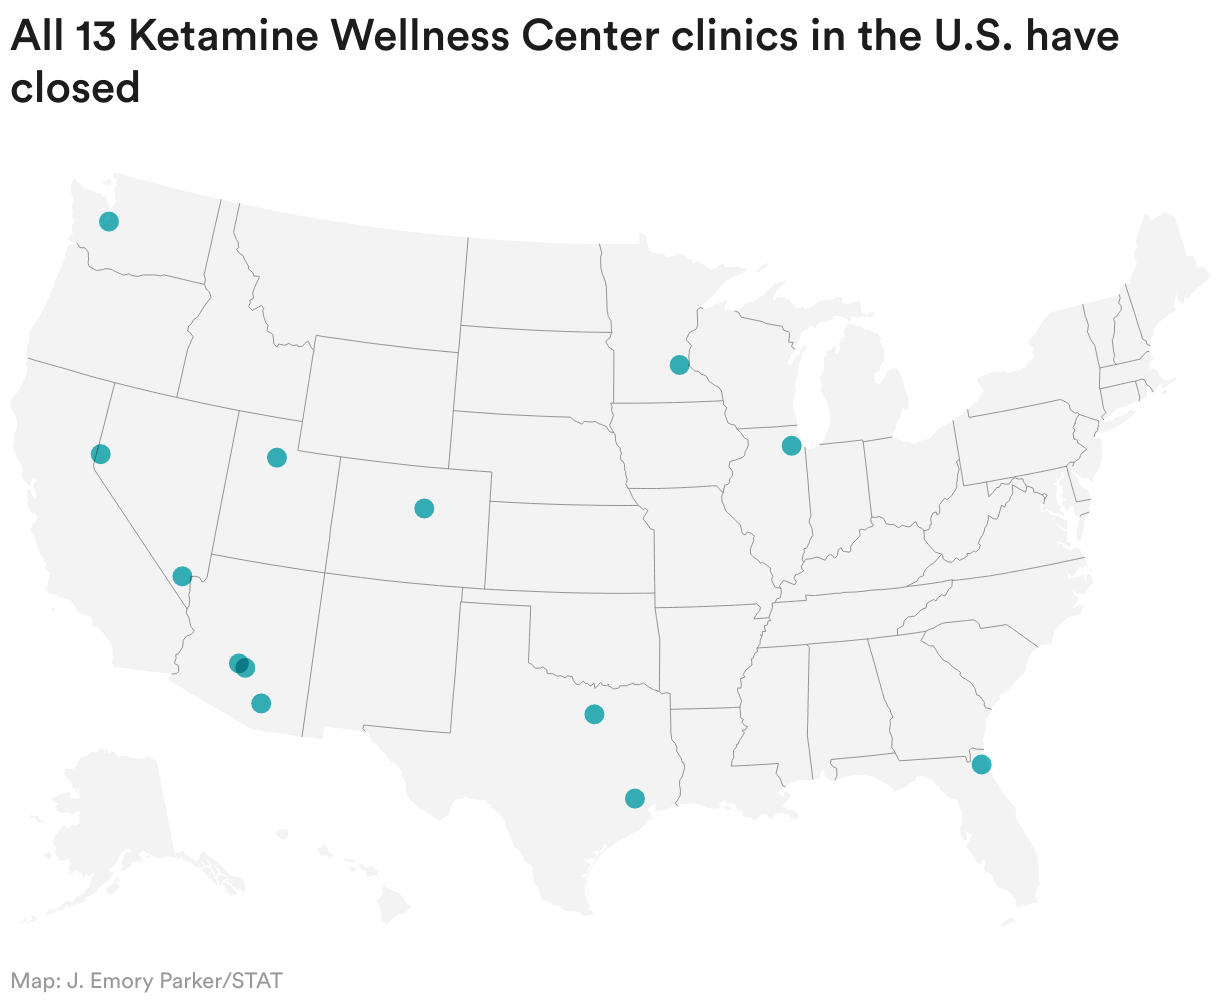 Map displaying the 13 locations of Ketamine Wellness Centers in the United States